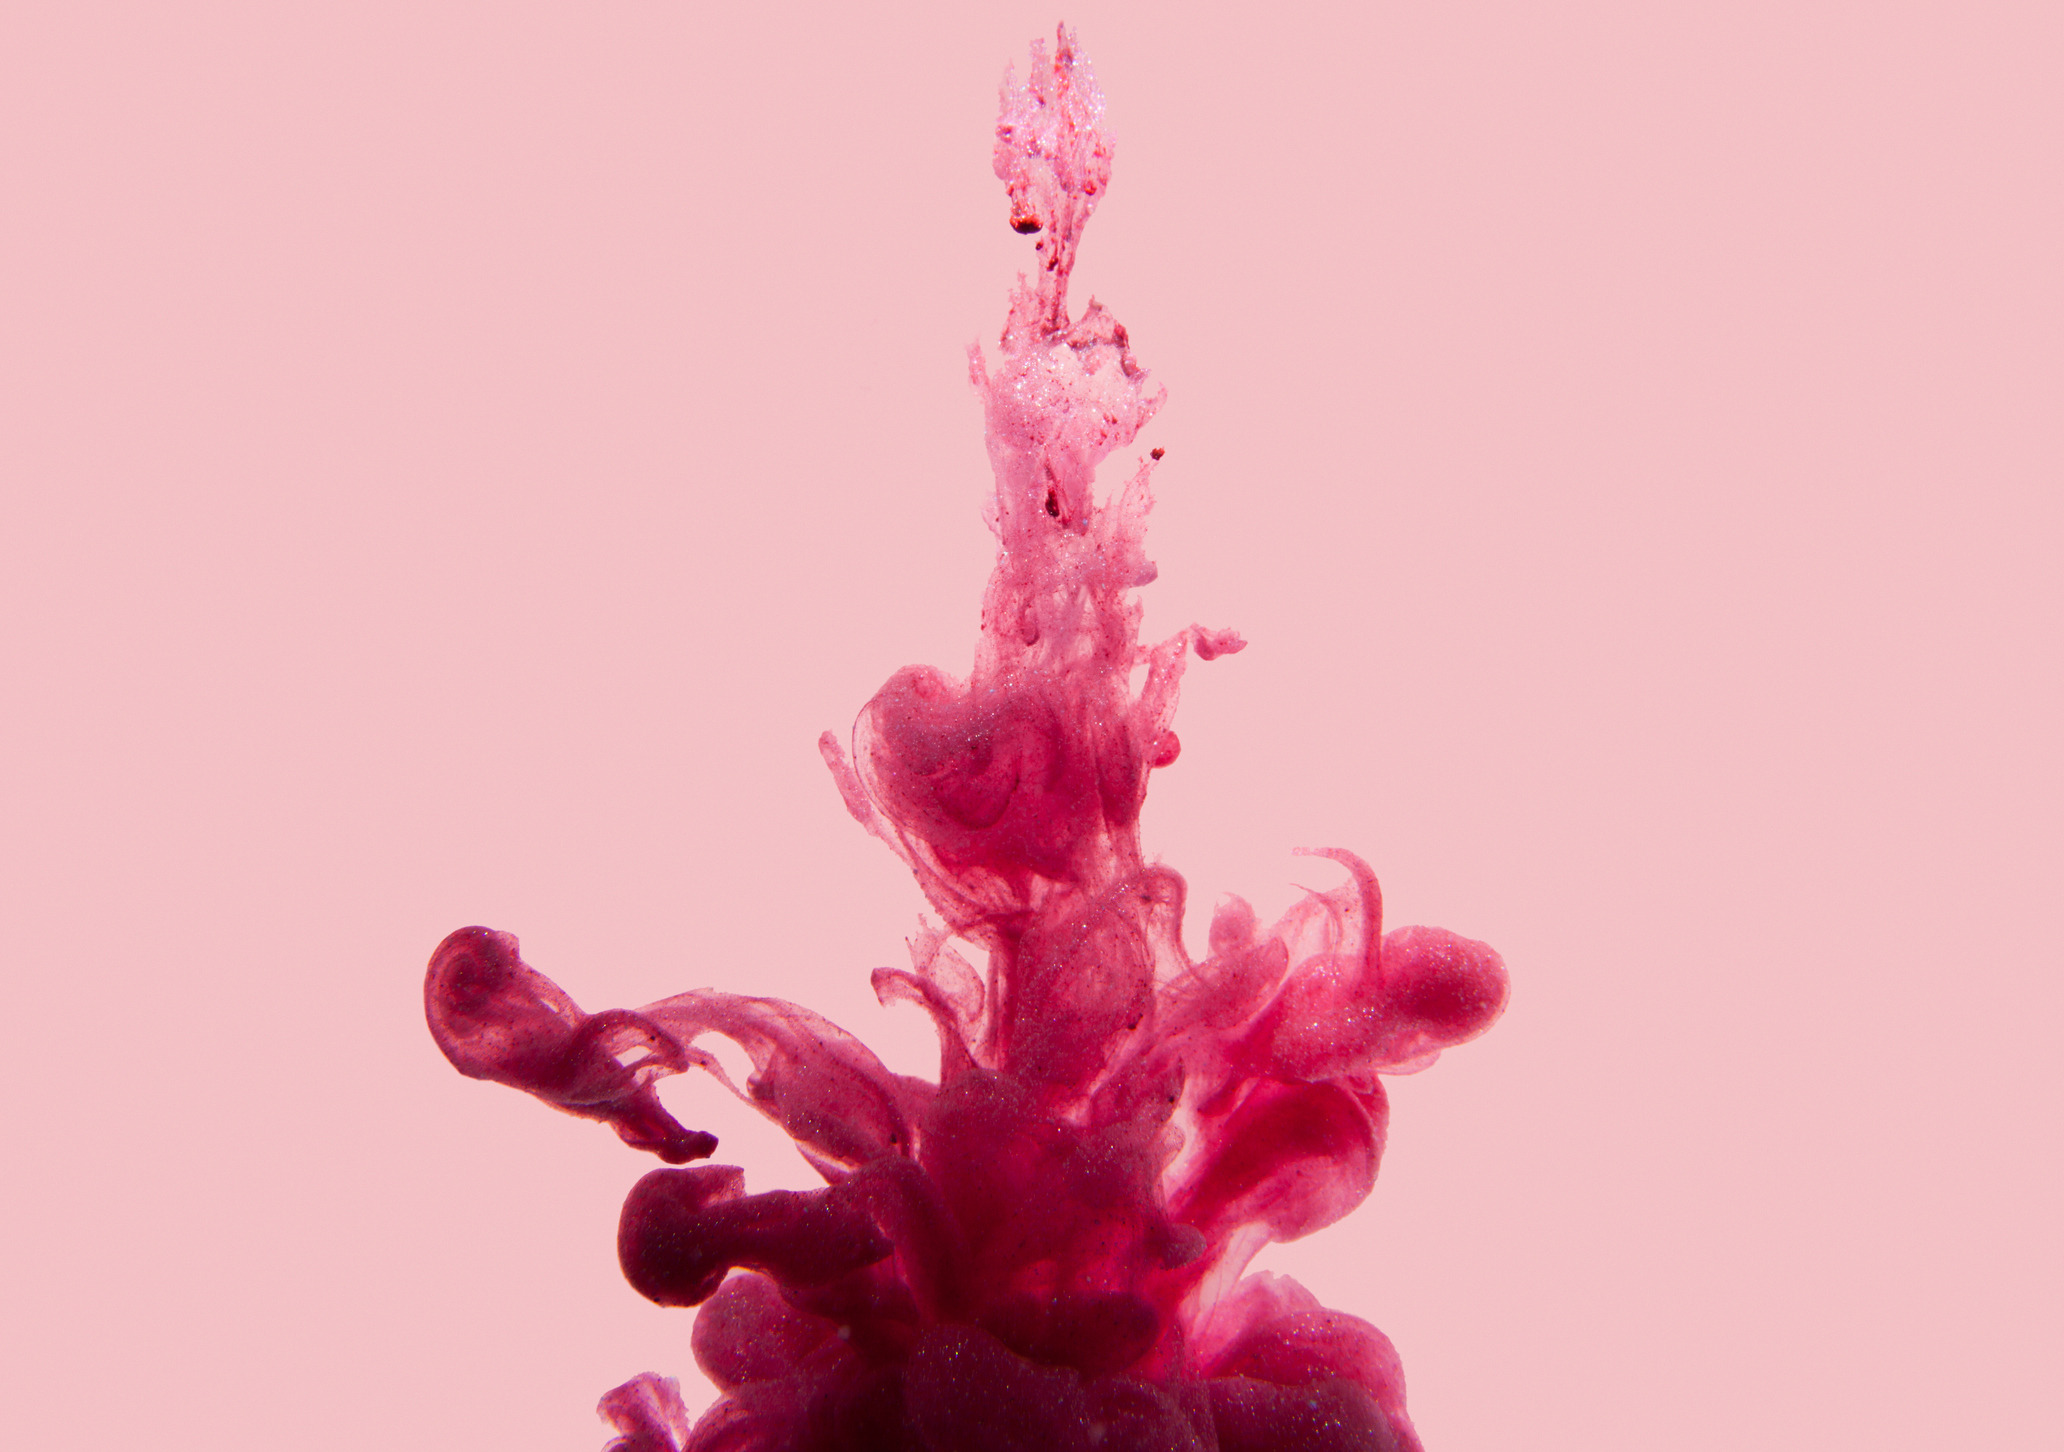 Pink ink swirling in water, creating abstract and intricate shapes against a plain background